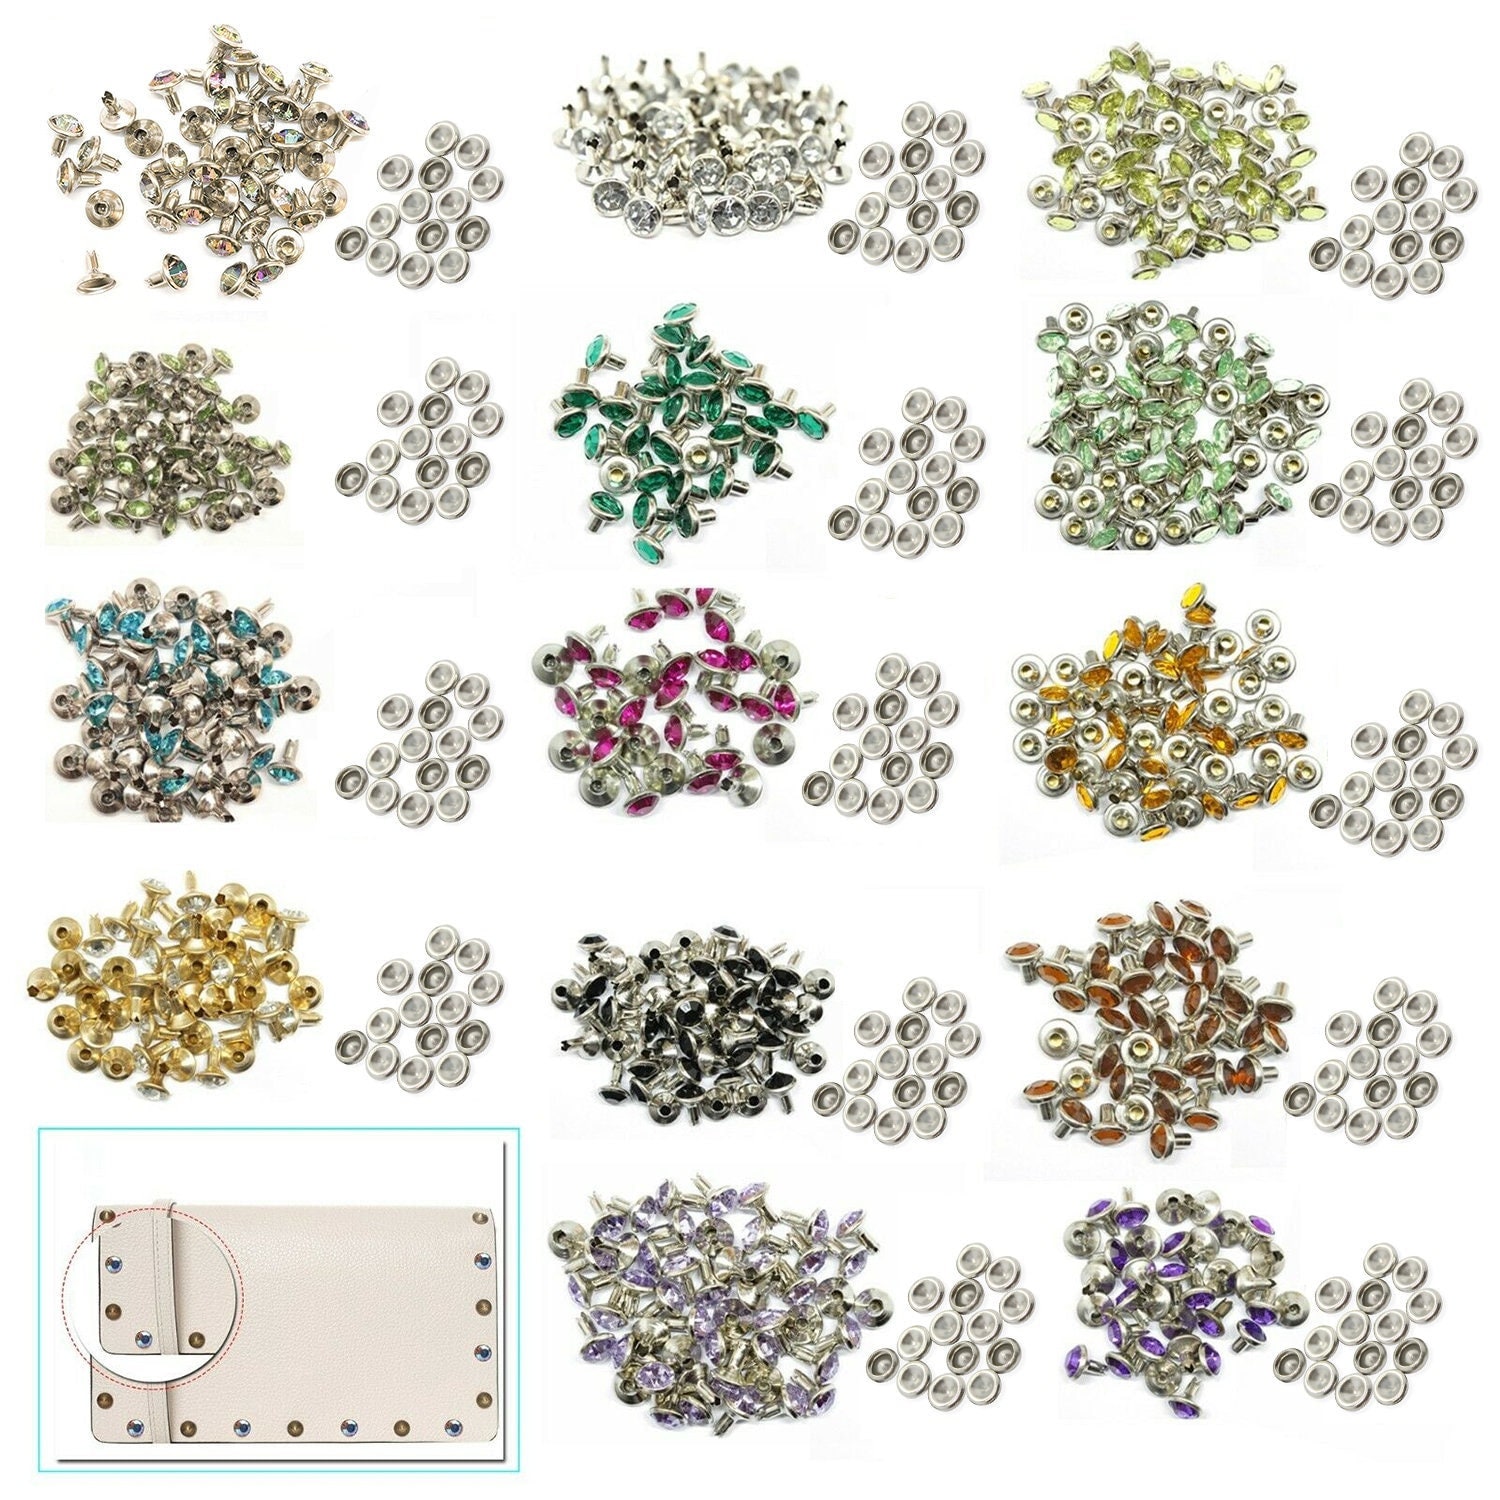 Silver Rhinestone Rivets, Leather Rapid Rivets for Fabric,12mm Speedy  Rivet, Crystal Snap Rivets for Clothing Double Cap Rivets 